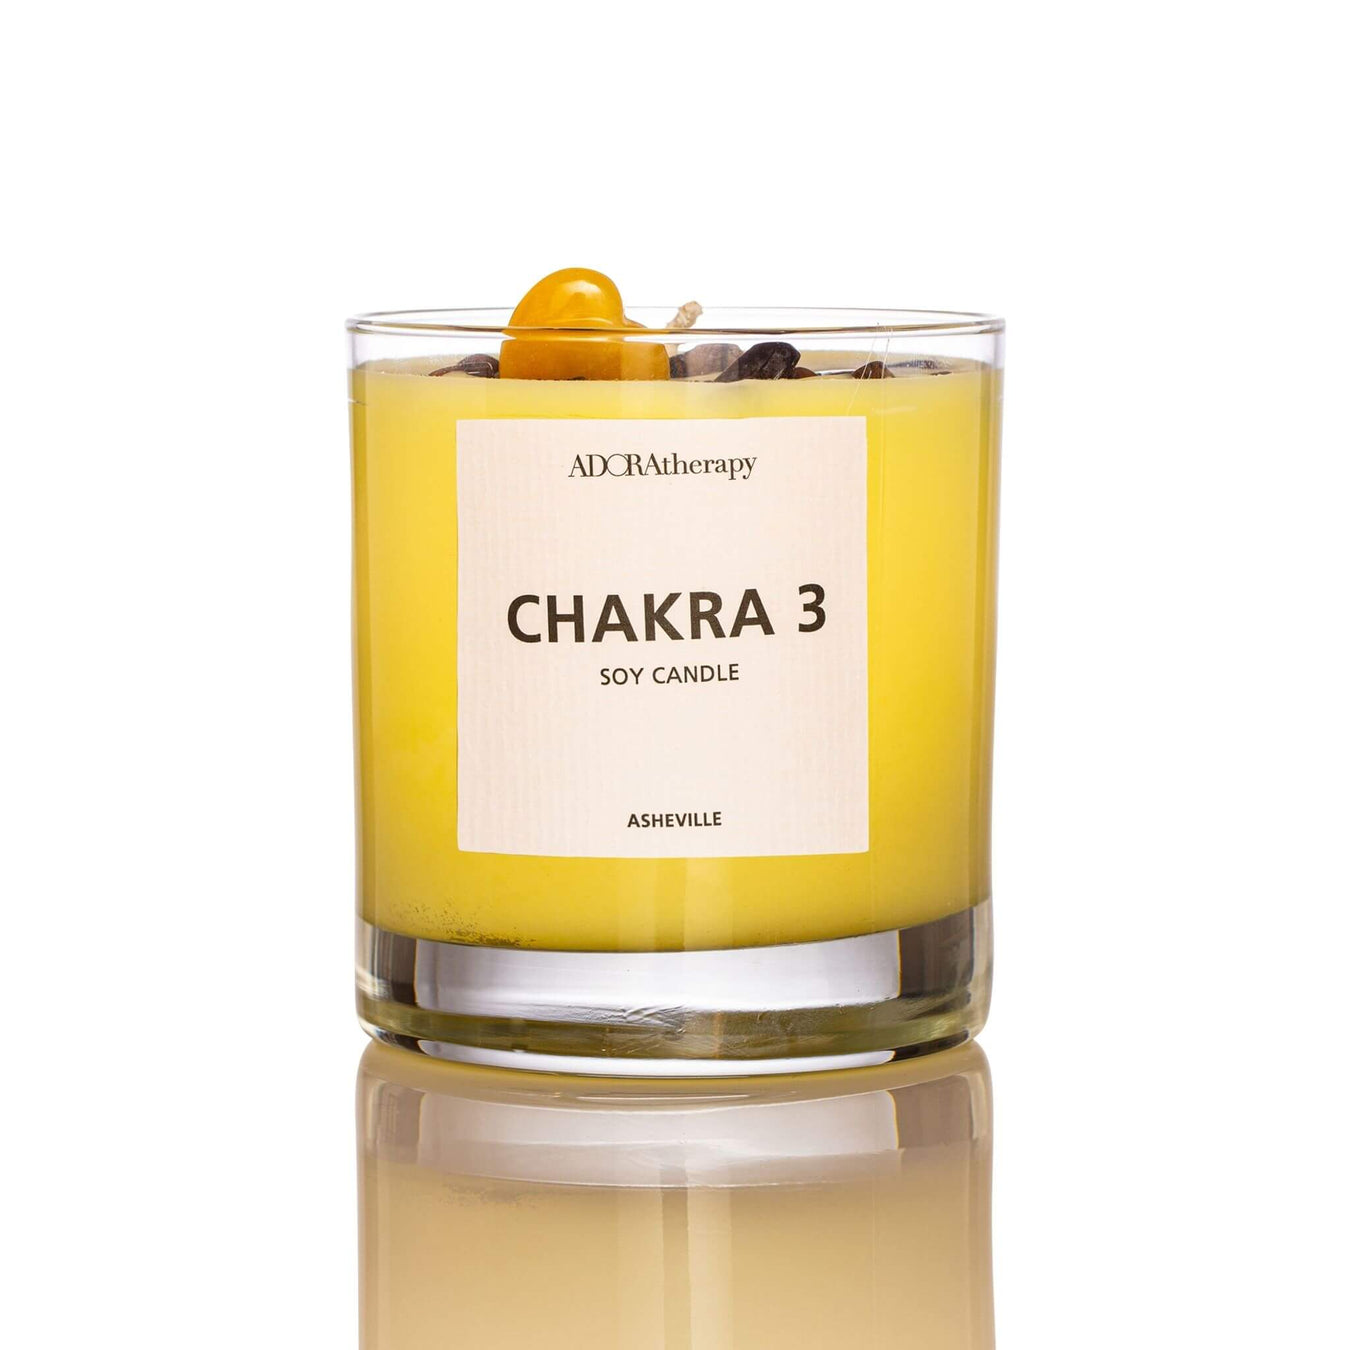 Chakra 3 Soy Candle with Tiger Eye Gemstones